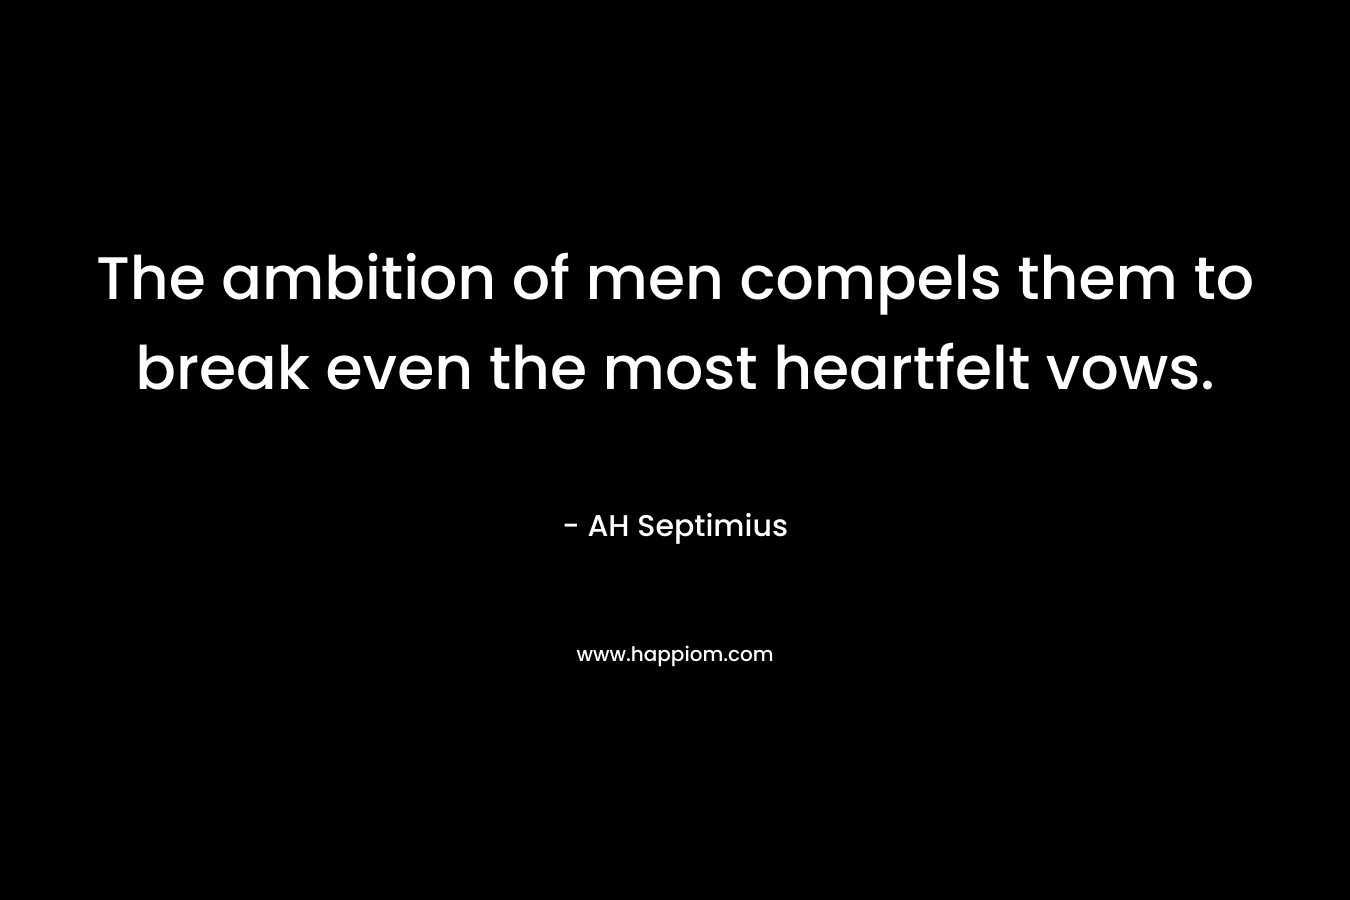 The ambition of men compels them to break even the most heartfelt vows. – AH Septimius